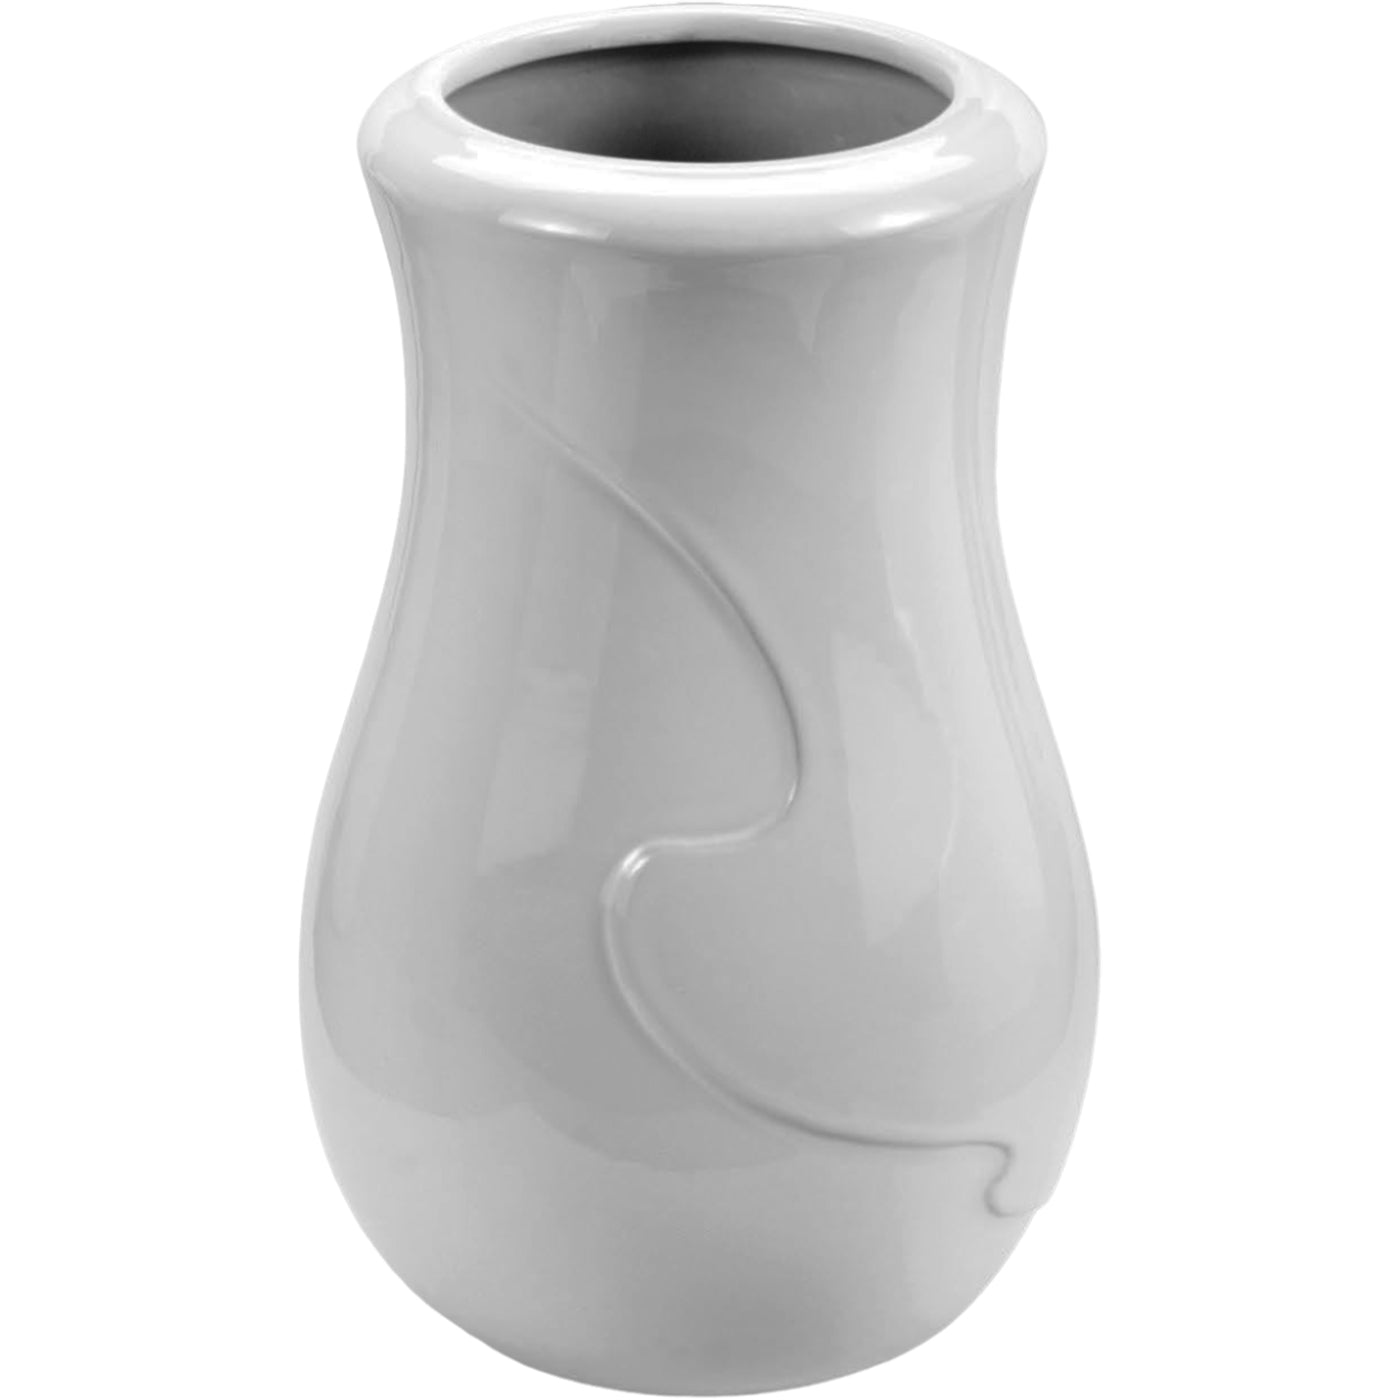 Grave vase Anna 21x13cm - 8.3x5.1in In white porcelain, wall attached ANN134P